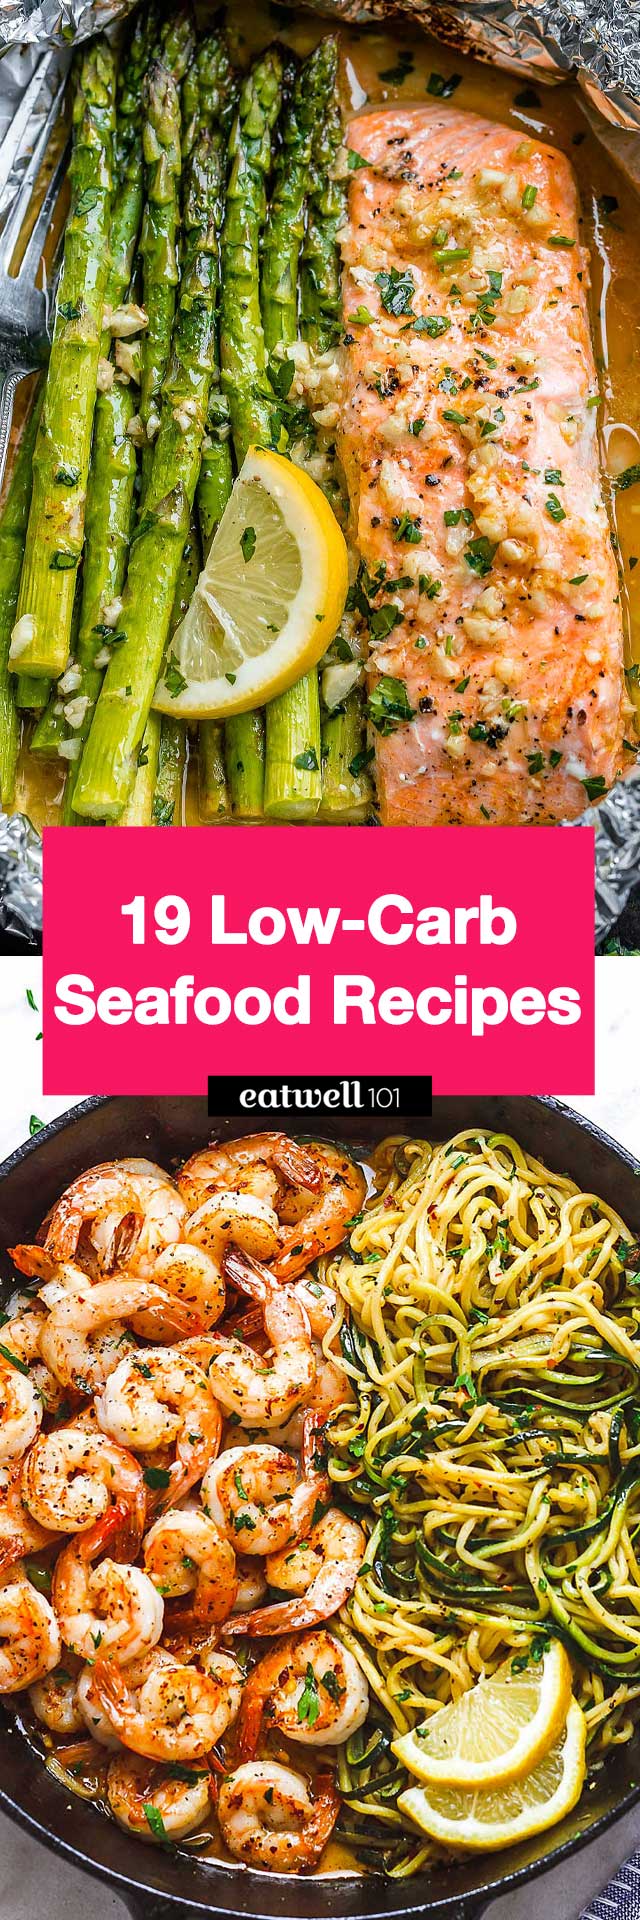  Easy Low Carb Seafood Recipes - #seafood #fish #lowcarb #recipes #eatwell101 - Meatless dinners are sooo much easier when you've got these easy fish recipes to get through. 